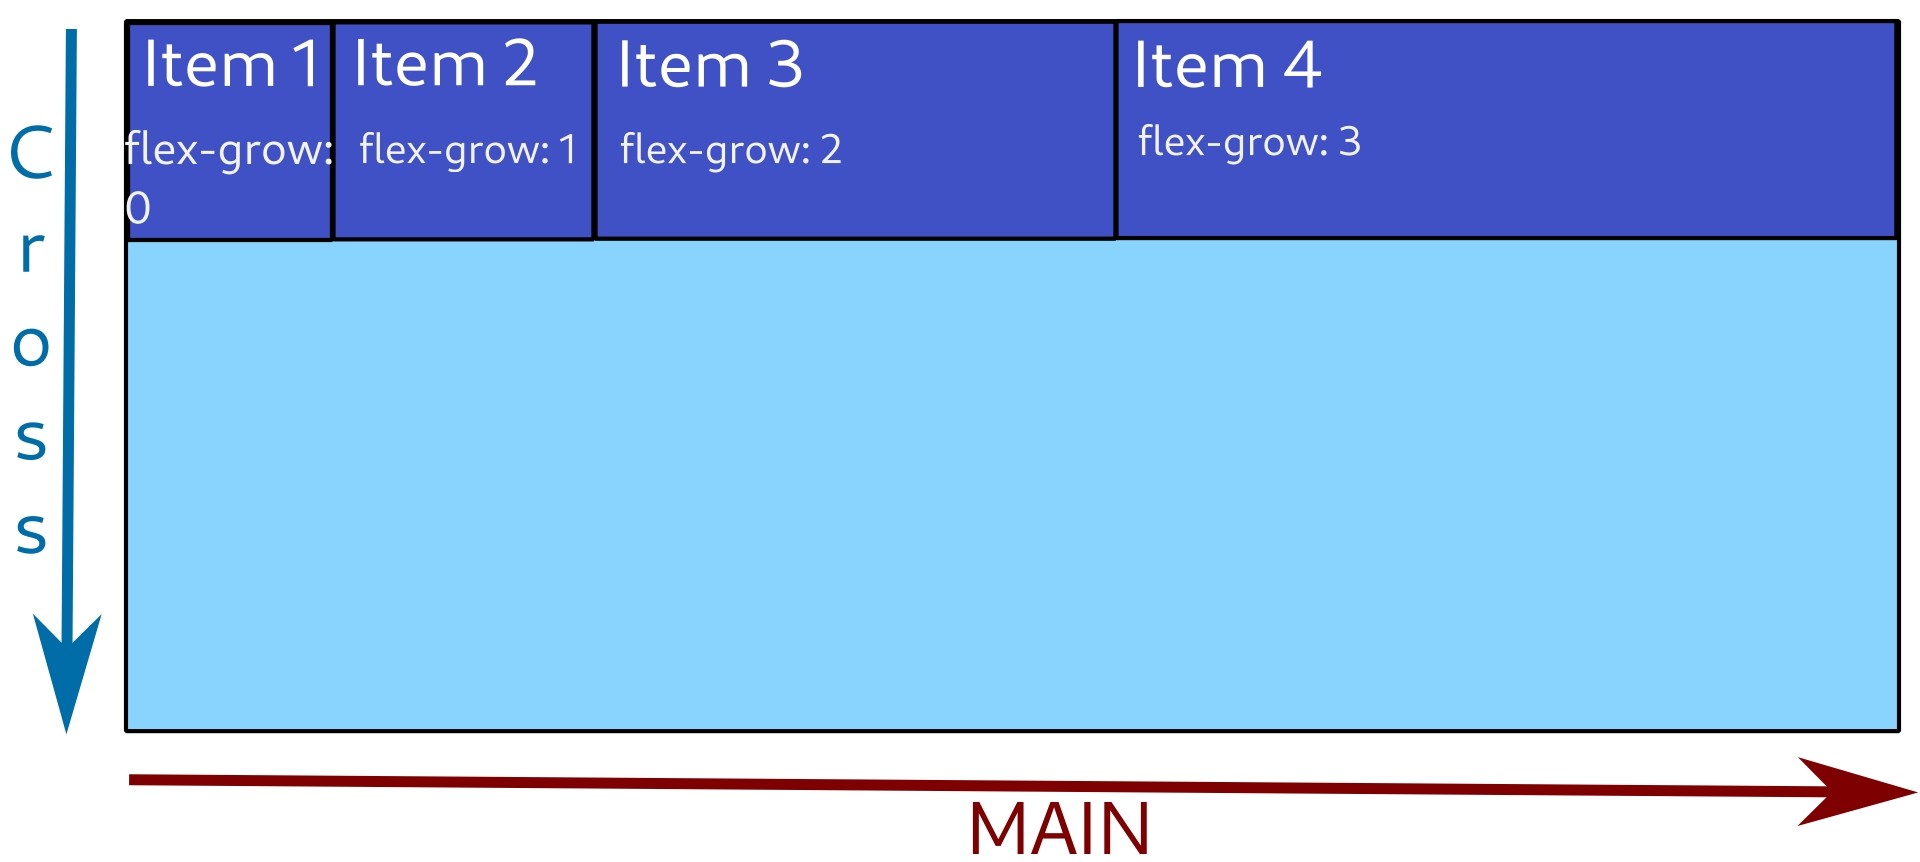 First item with flex-grow 0 takes the width of its content,
        the second one has flex-grow 1,
        the third one with flex-grow 2 is twice as big as the second one,
        the fourth one with flex-grow 3 is three times as big as the second one.